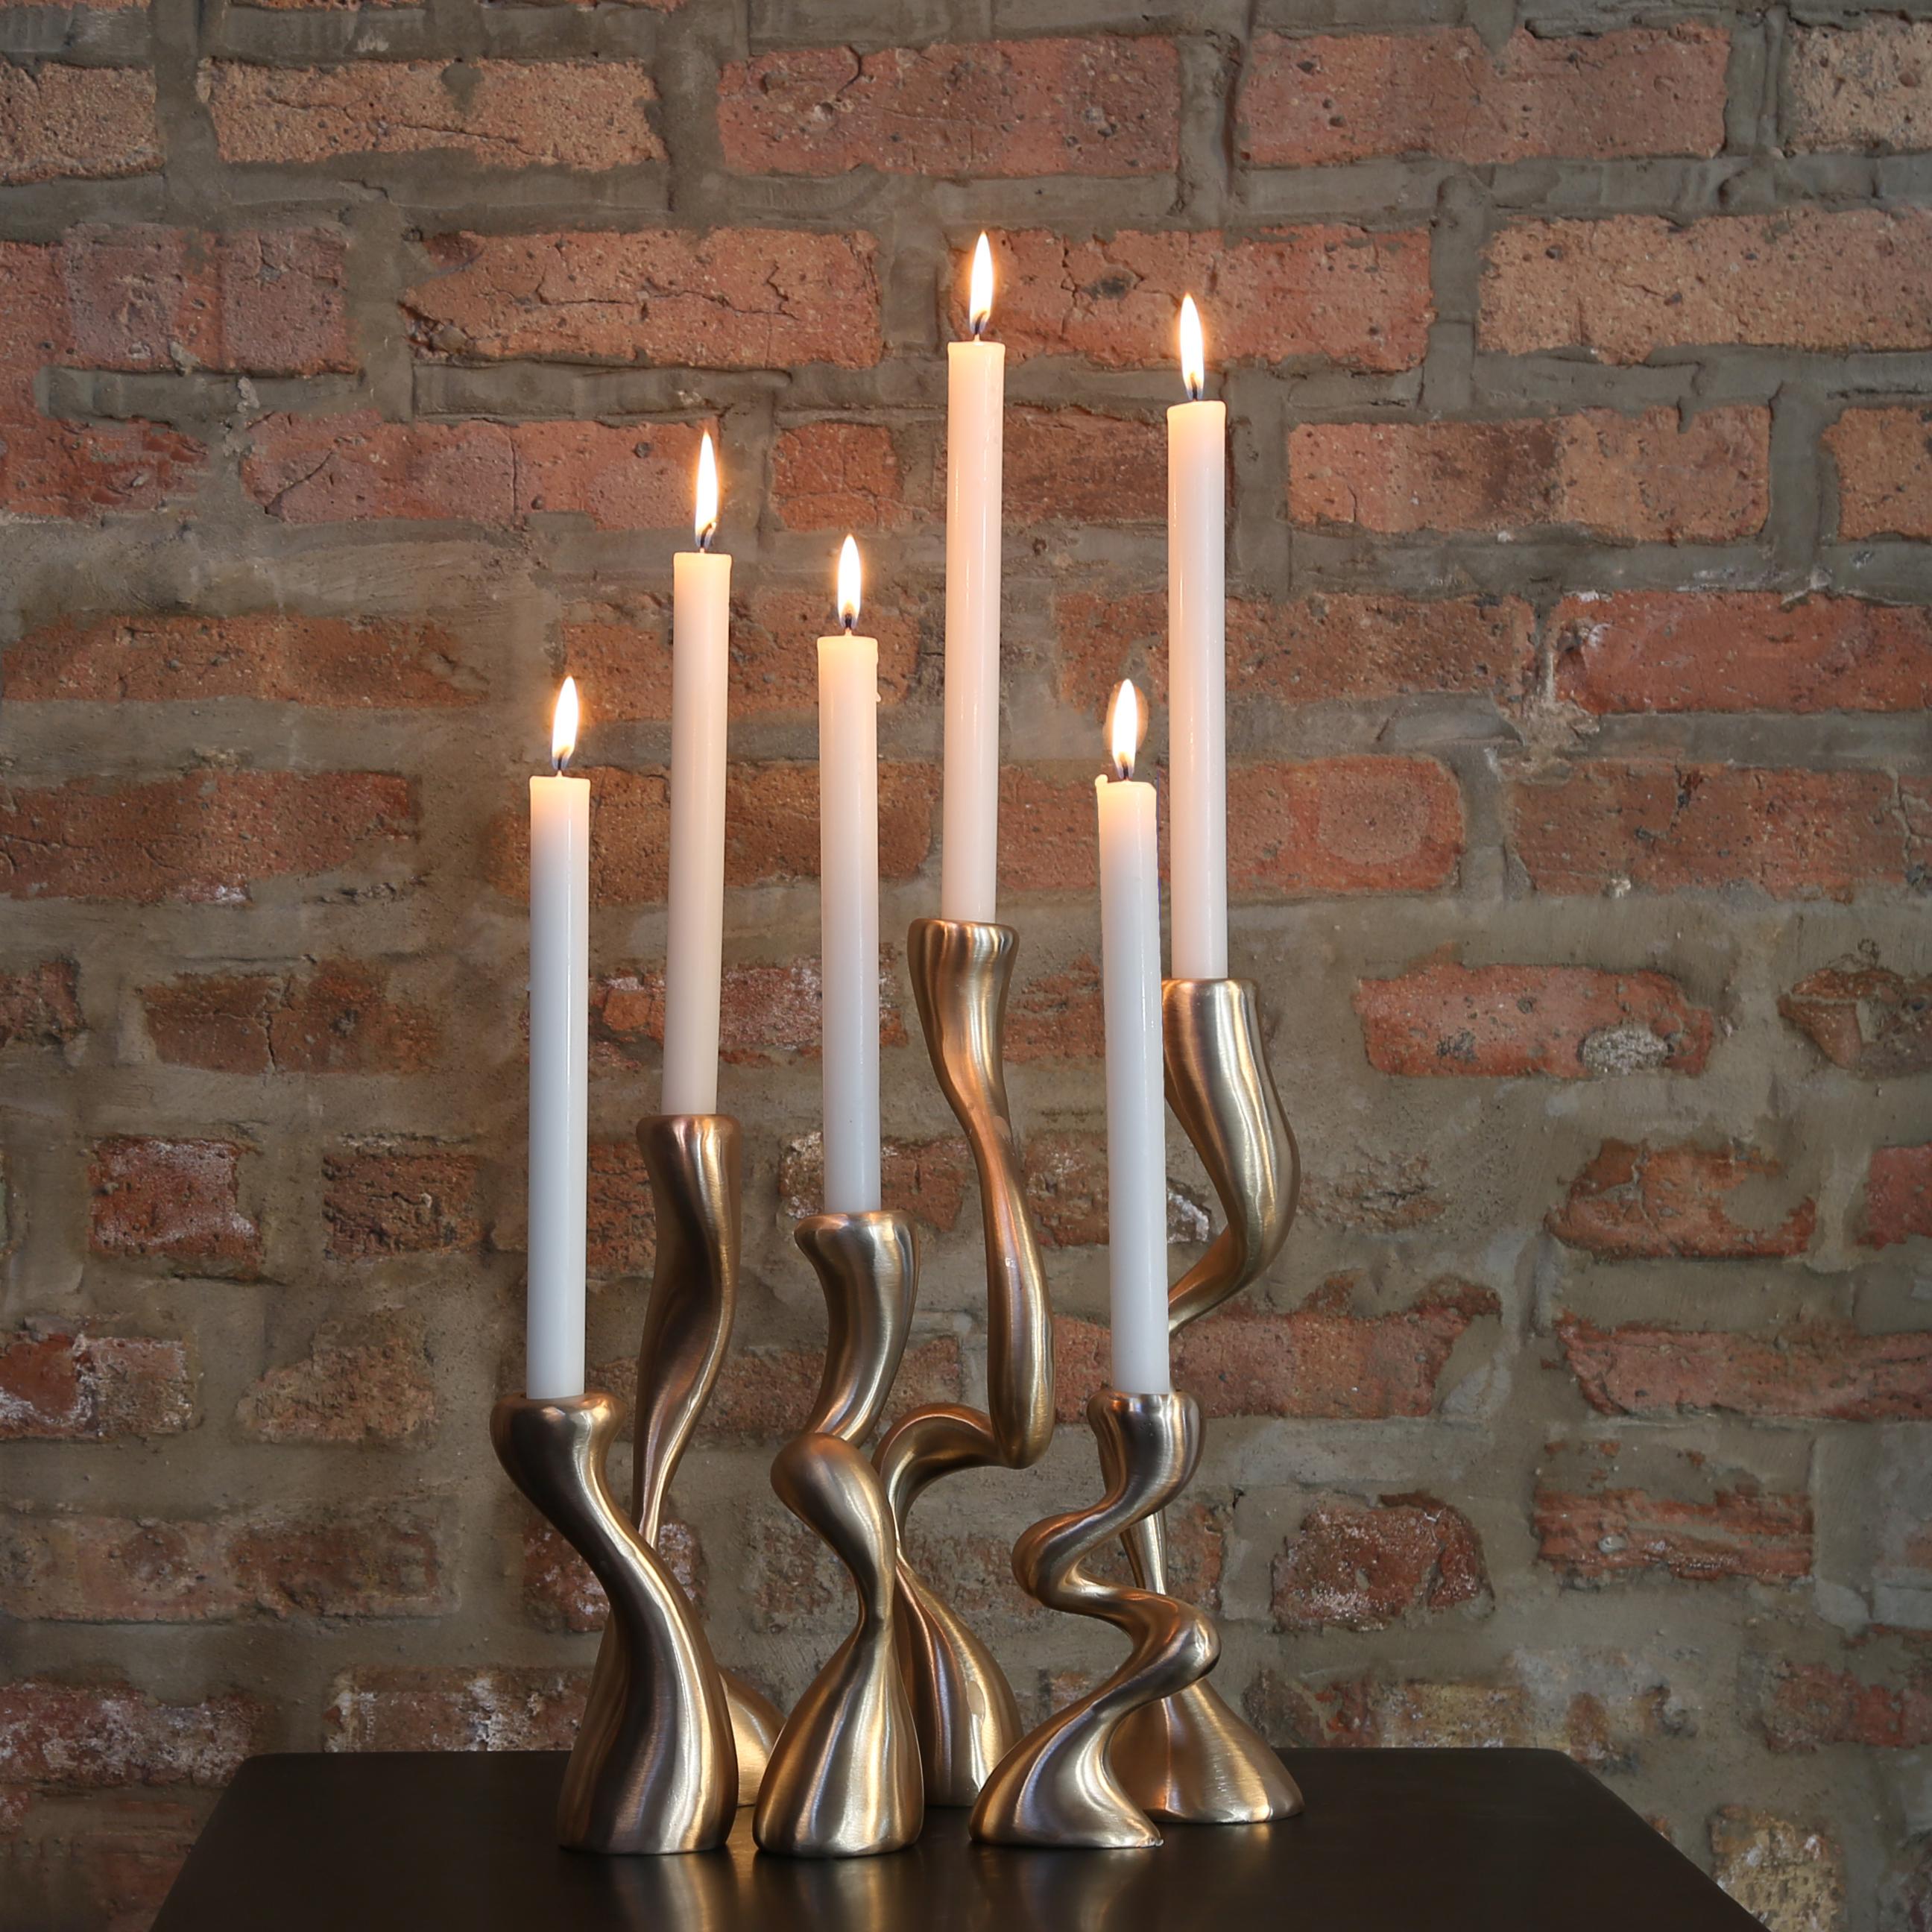 Anna Mae Candlesticks / Candleholders Cast Brushed Bronze, USA Jordan Mozer 2003 In New Condition For Sale In Chicago, IL